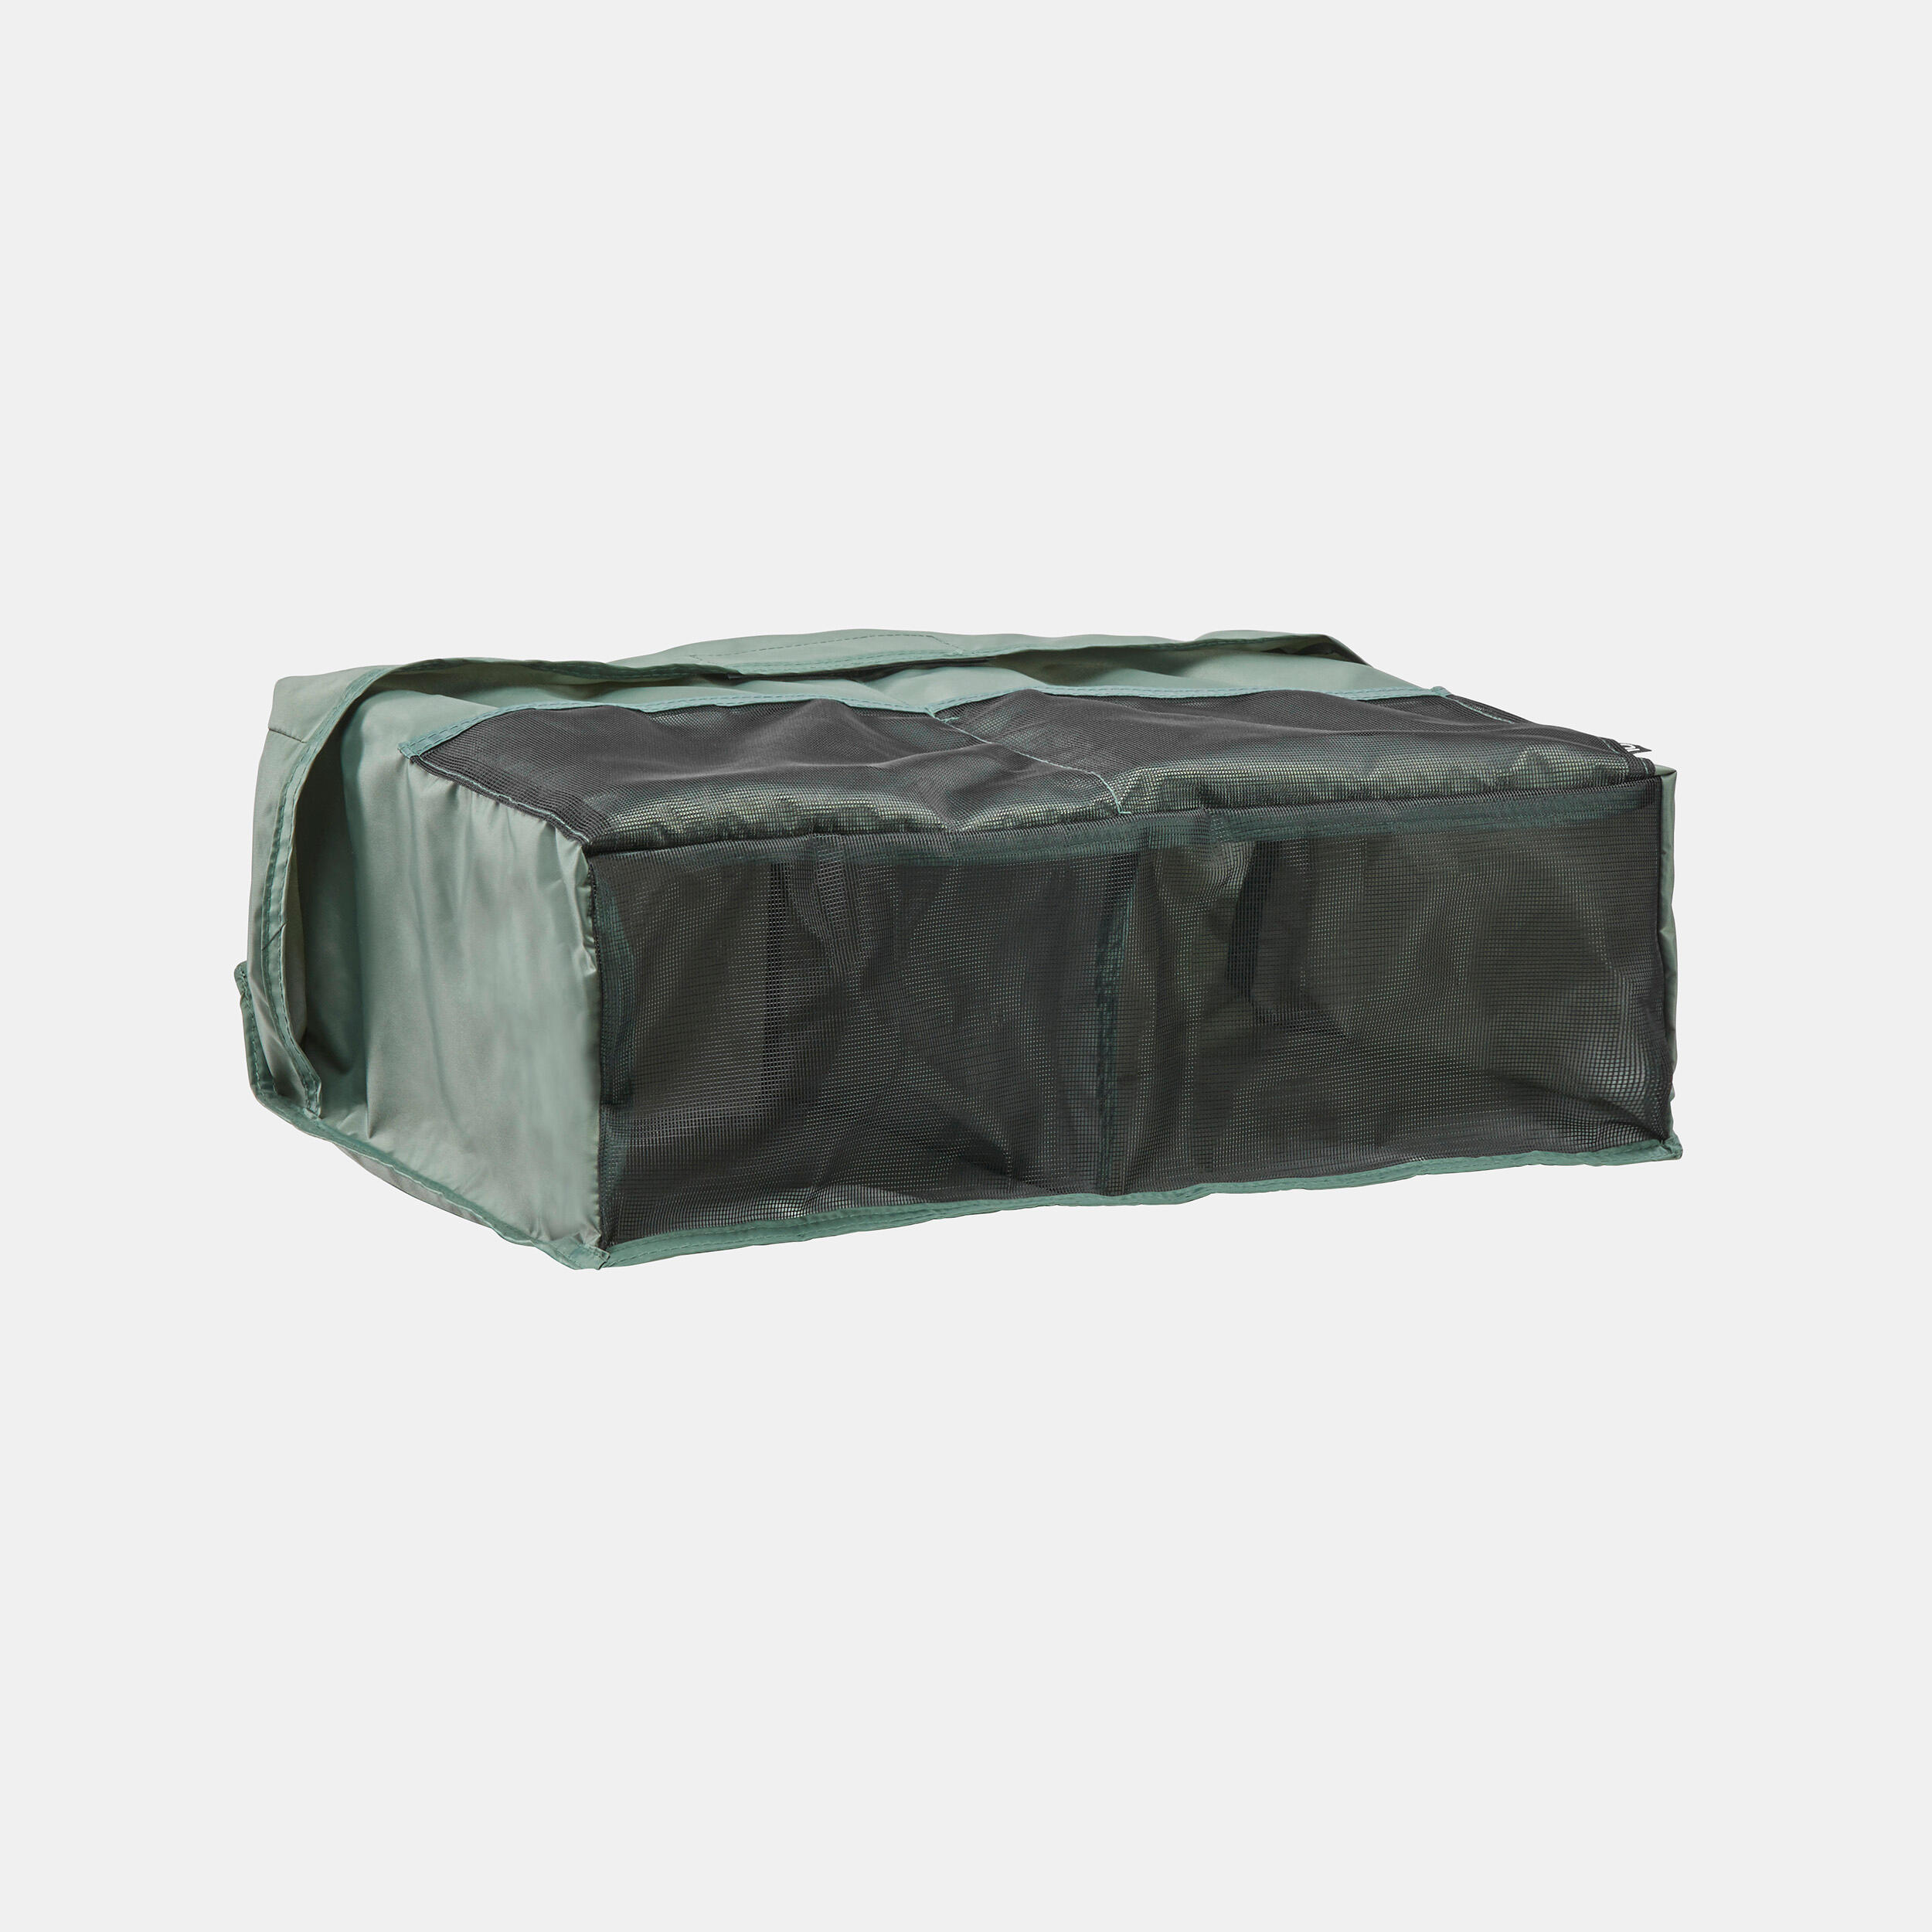 Removable Shoe Pocket for MH500 2p Tent 3/4